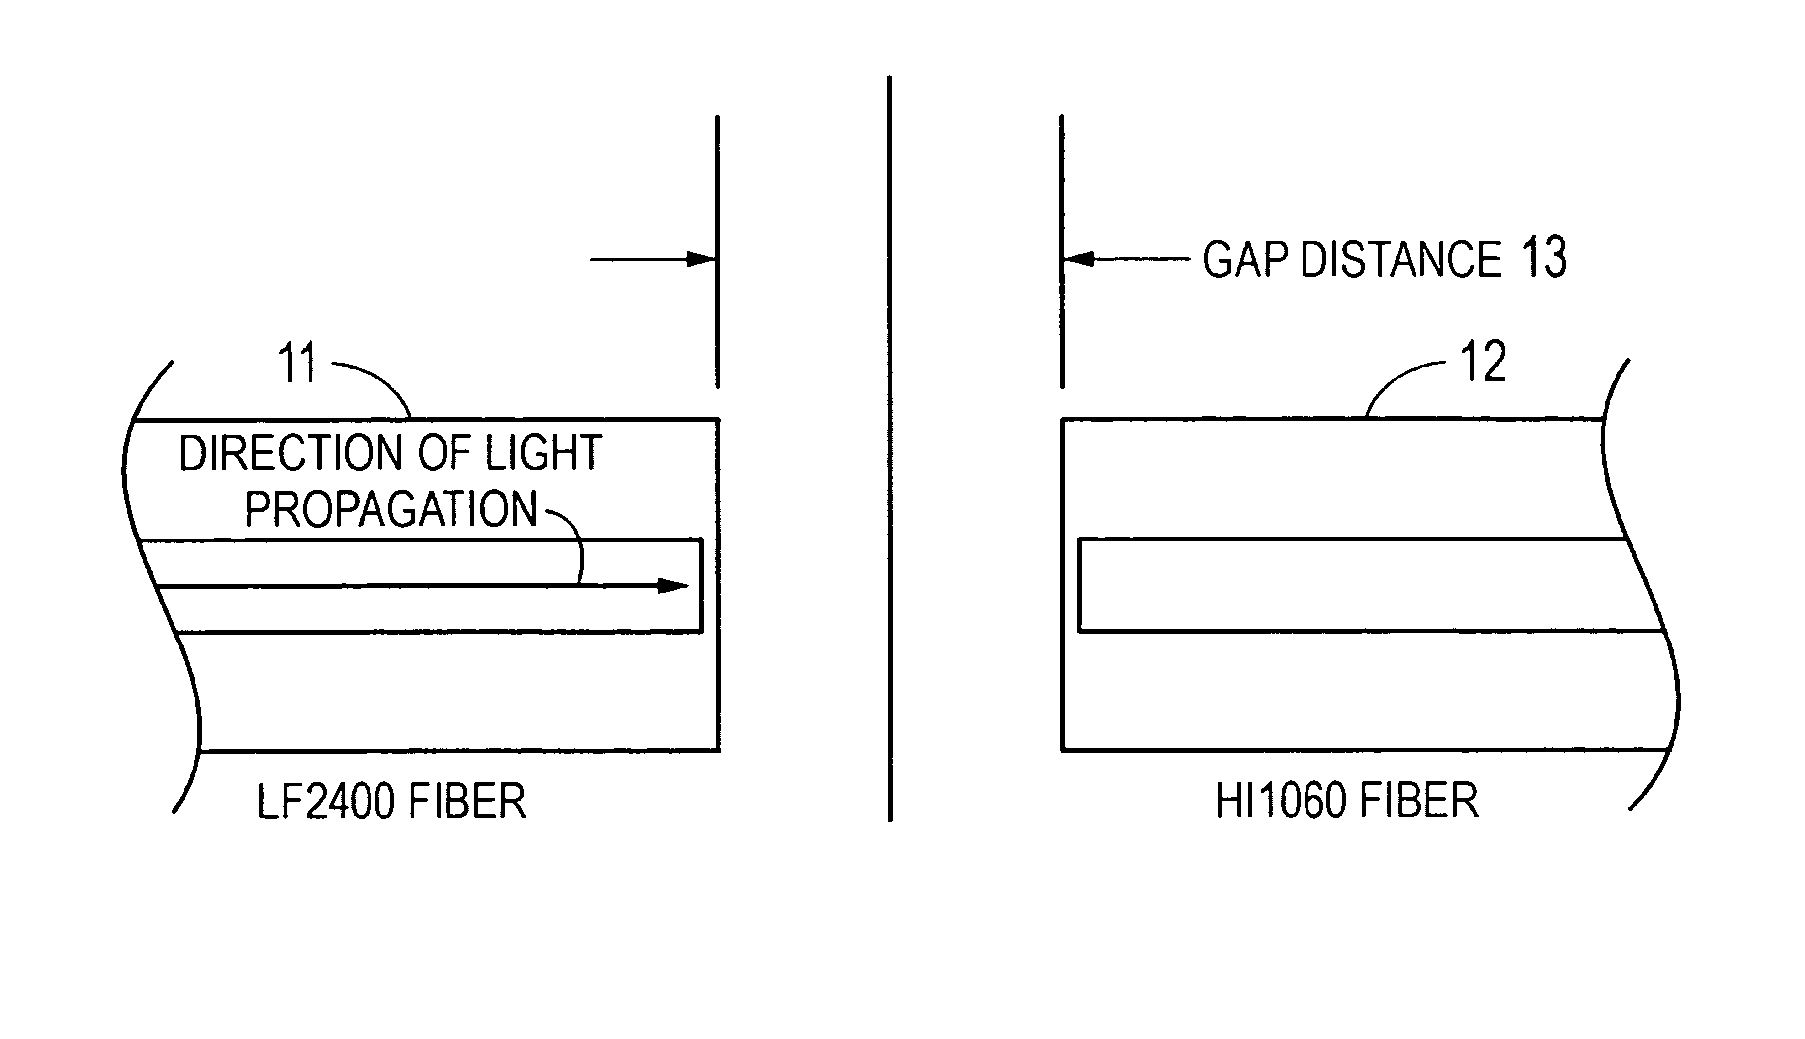 Fusion splicing of highly rare-earth-doped optical fibers